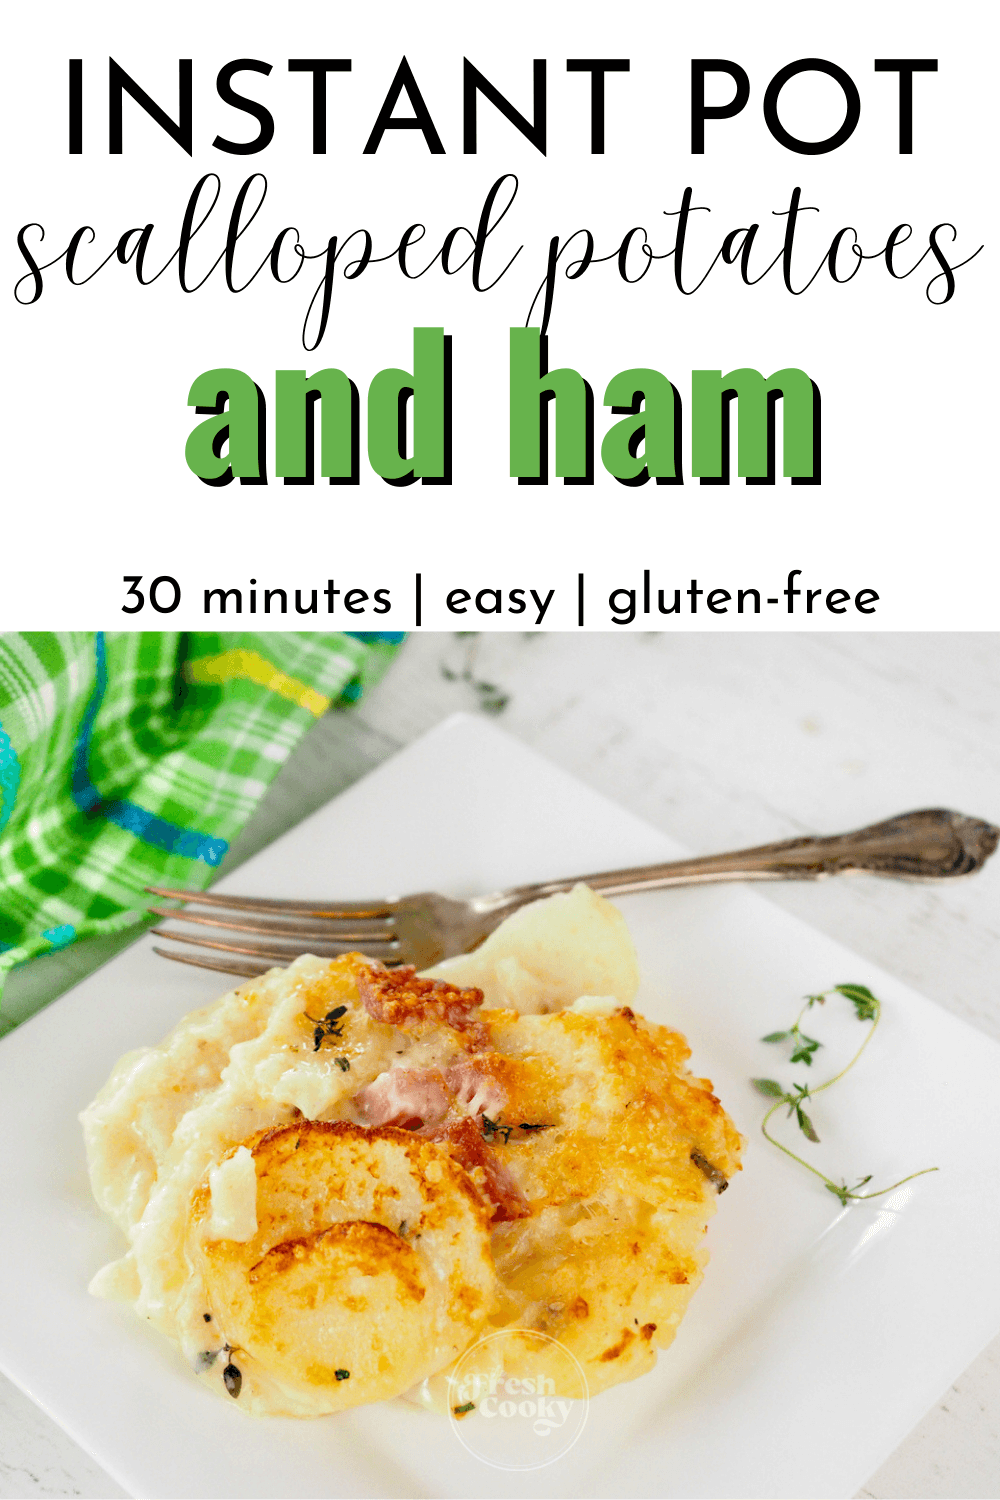 Easy instant pot scalloped potatoes with ham pin, image of slice of scalloped potatoes on plate with fork and fresh thyme.